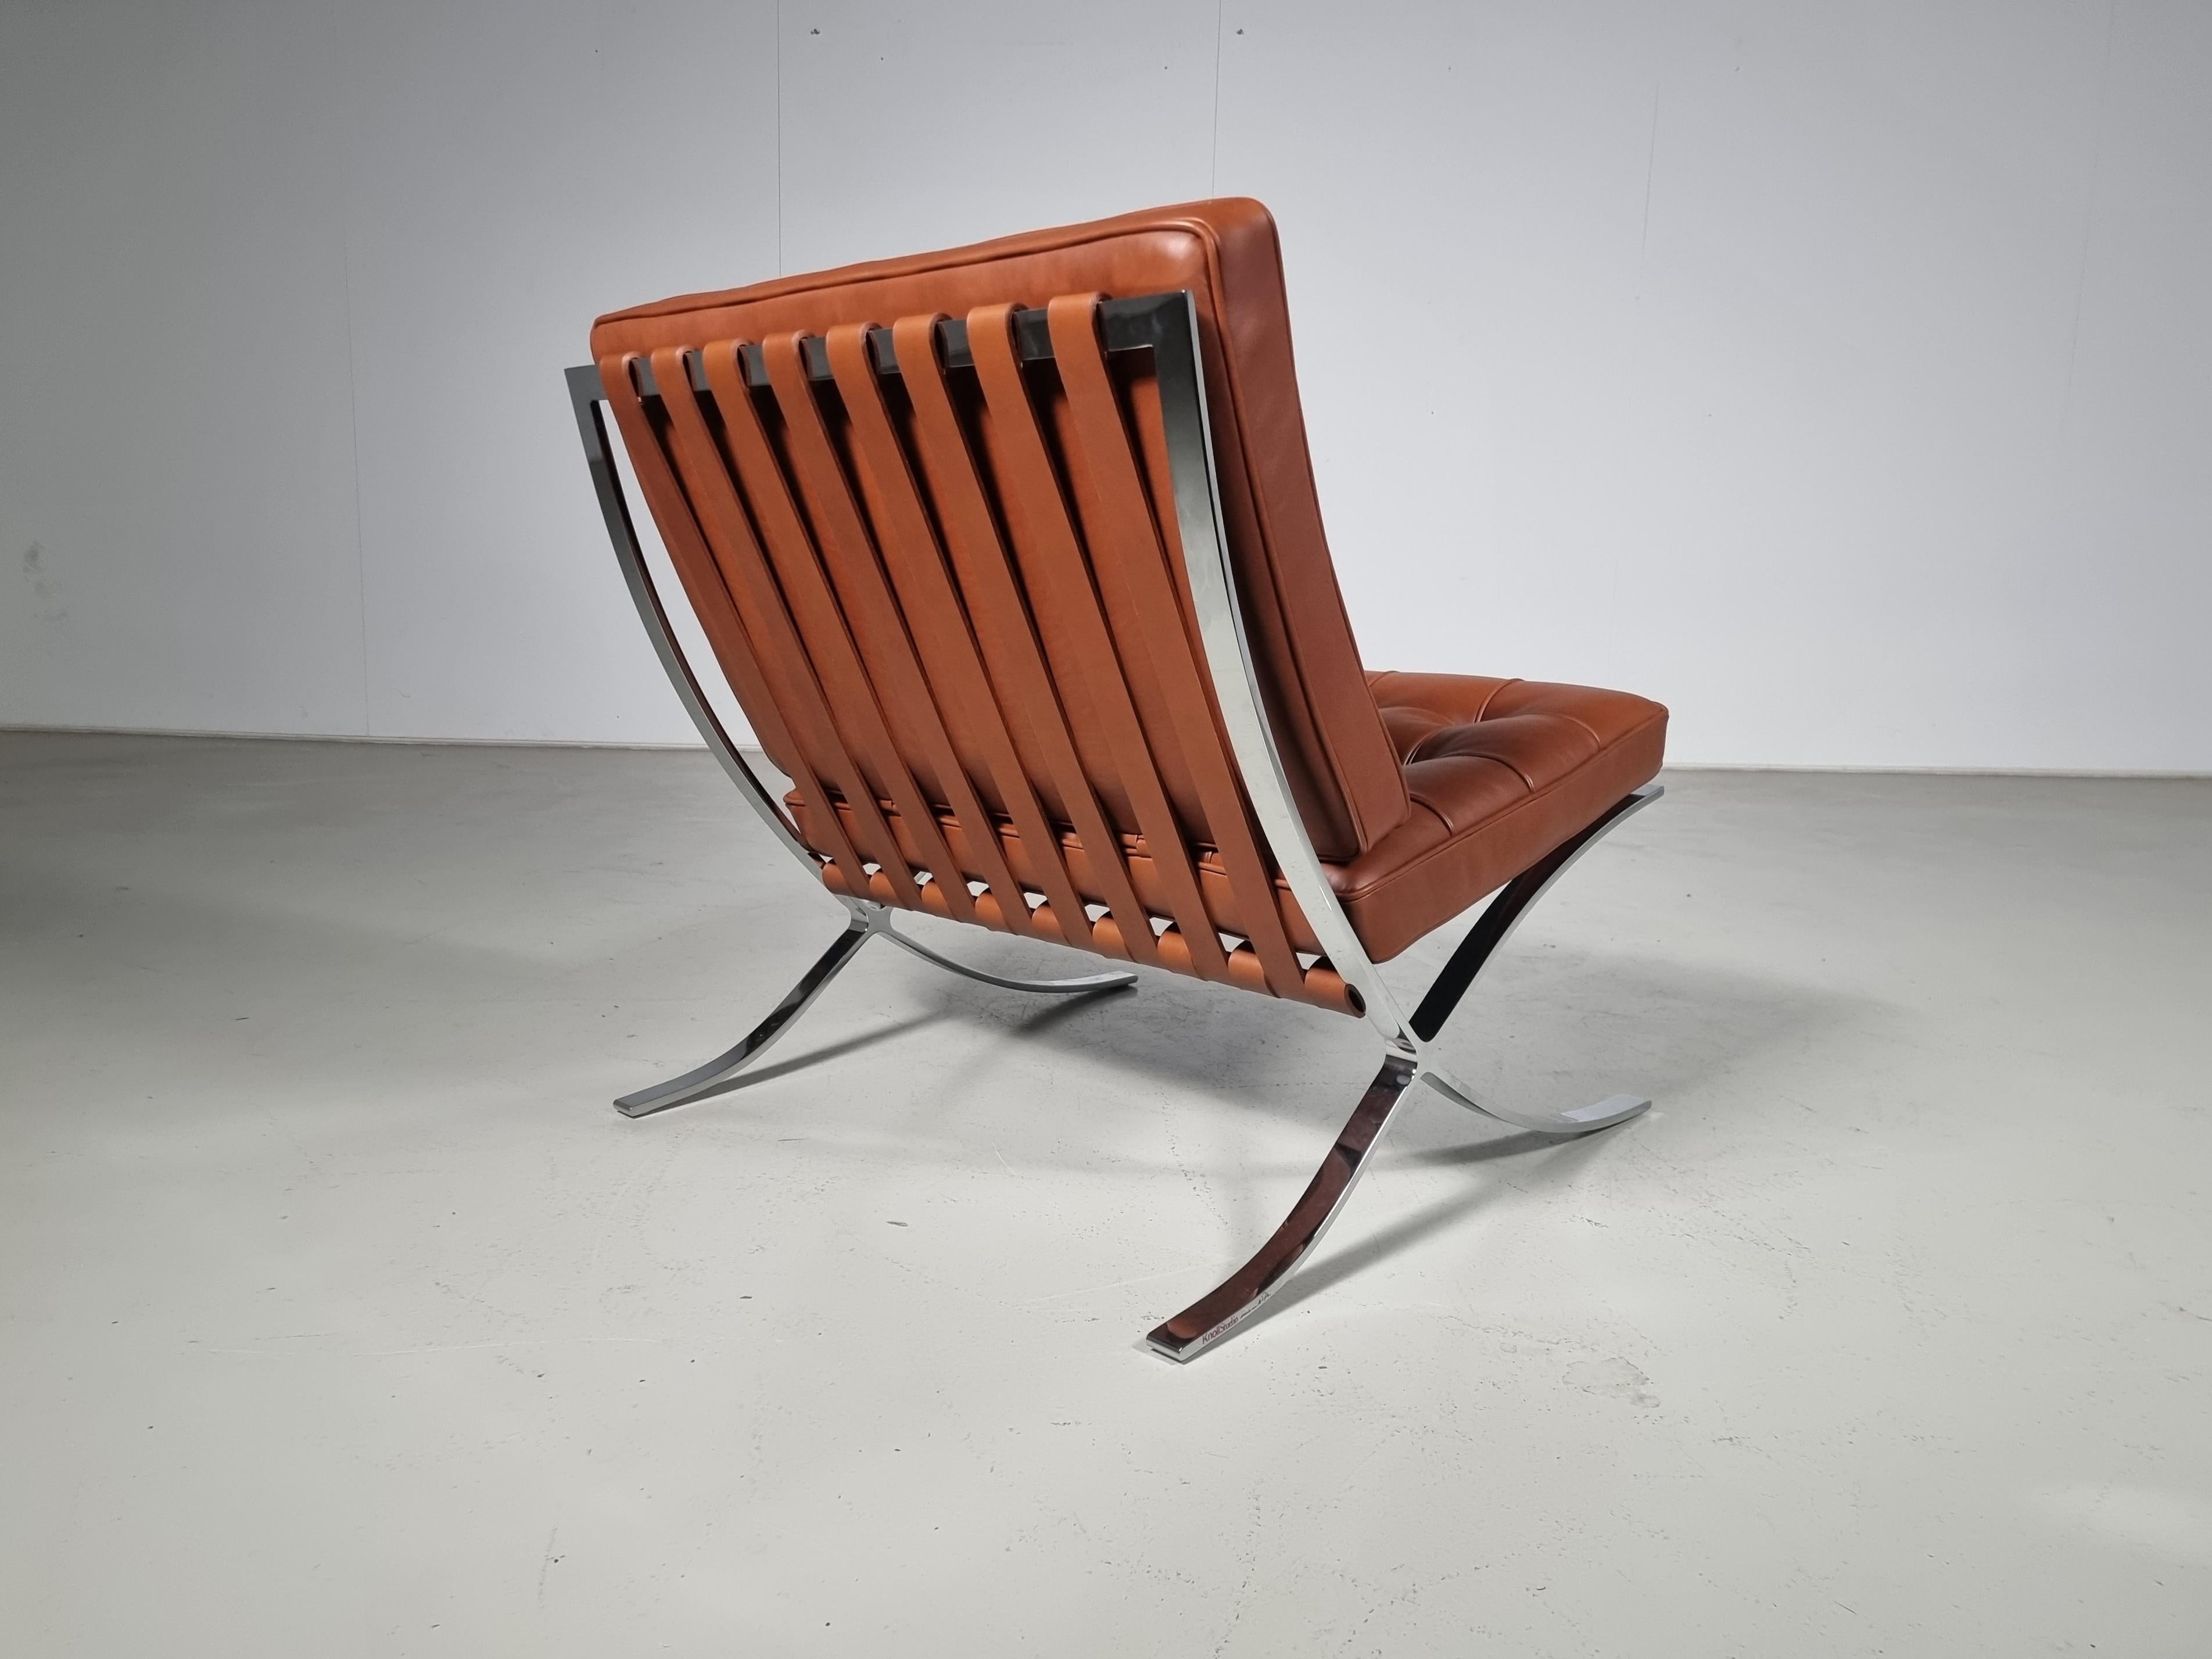 Mid-Century Modern Barcelona lounge chair by Mies van der Rohe for Knoll International